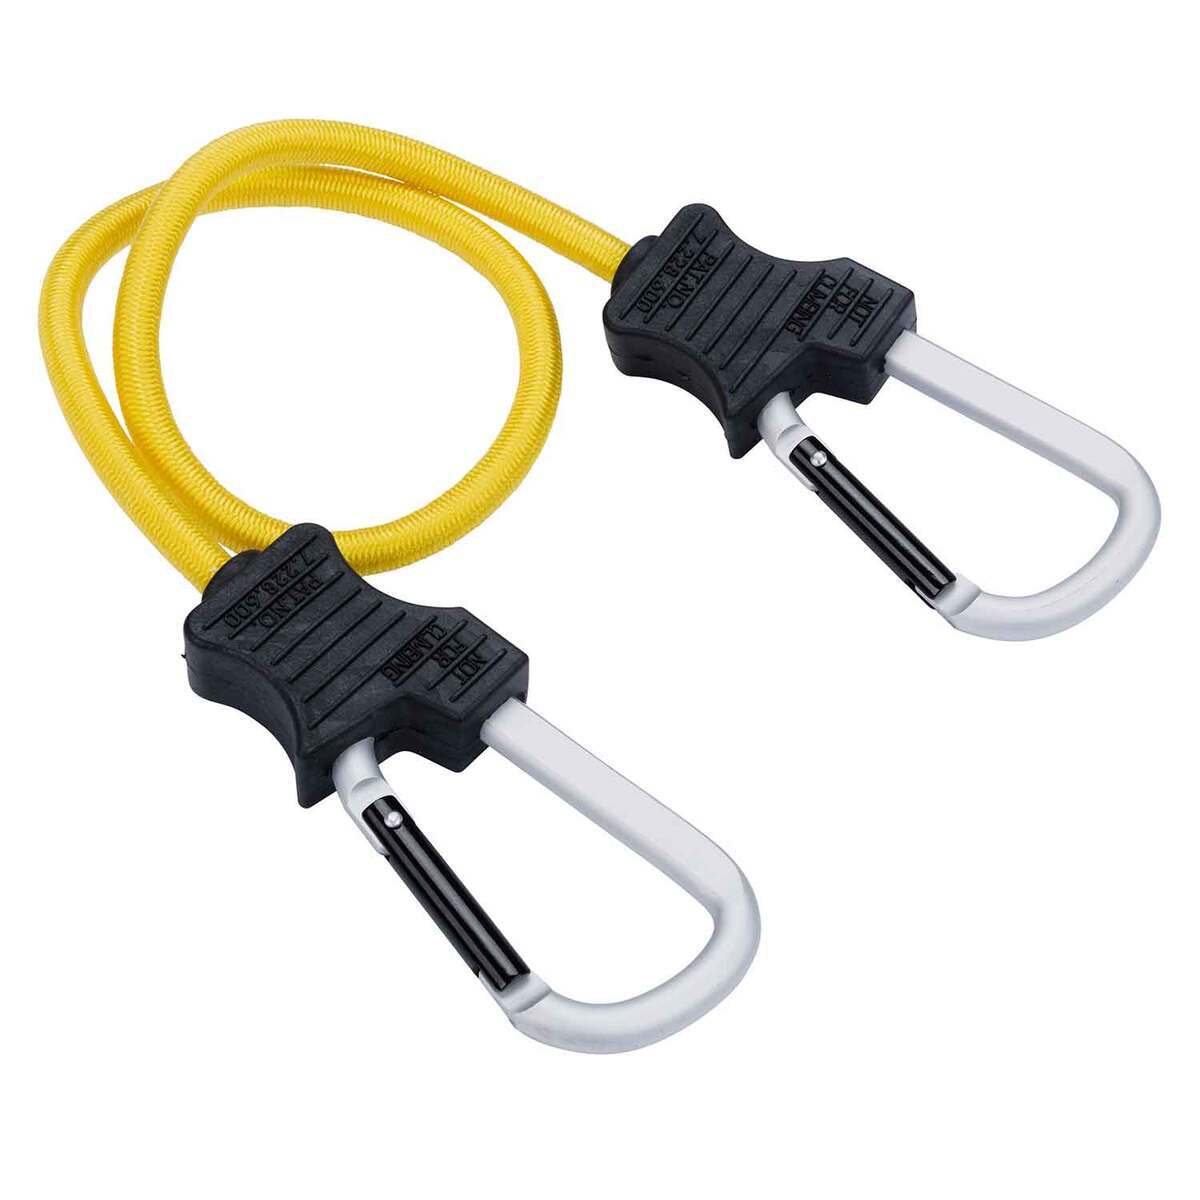 Keeper - 48” Carabiner Bungee Cord, 2 Pack - UV and Weather-Resistant